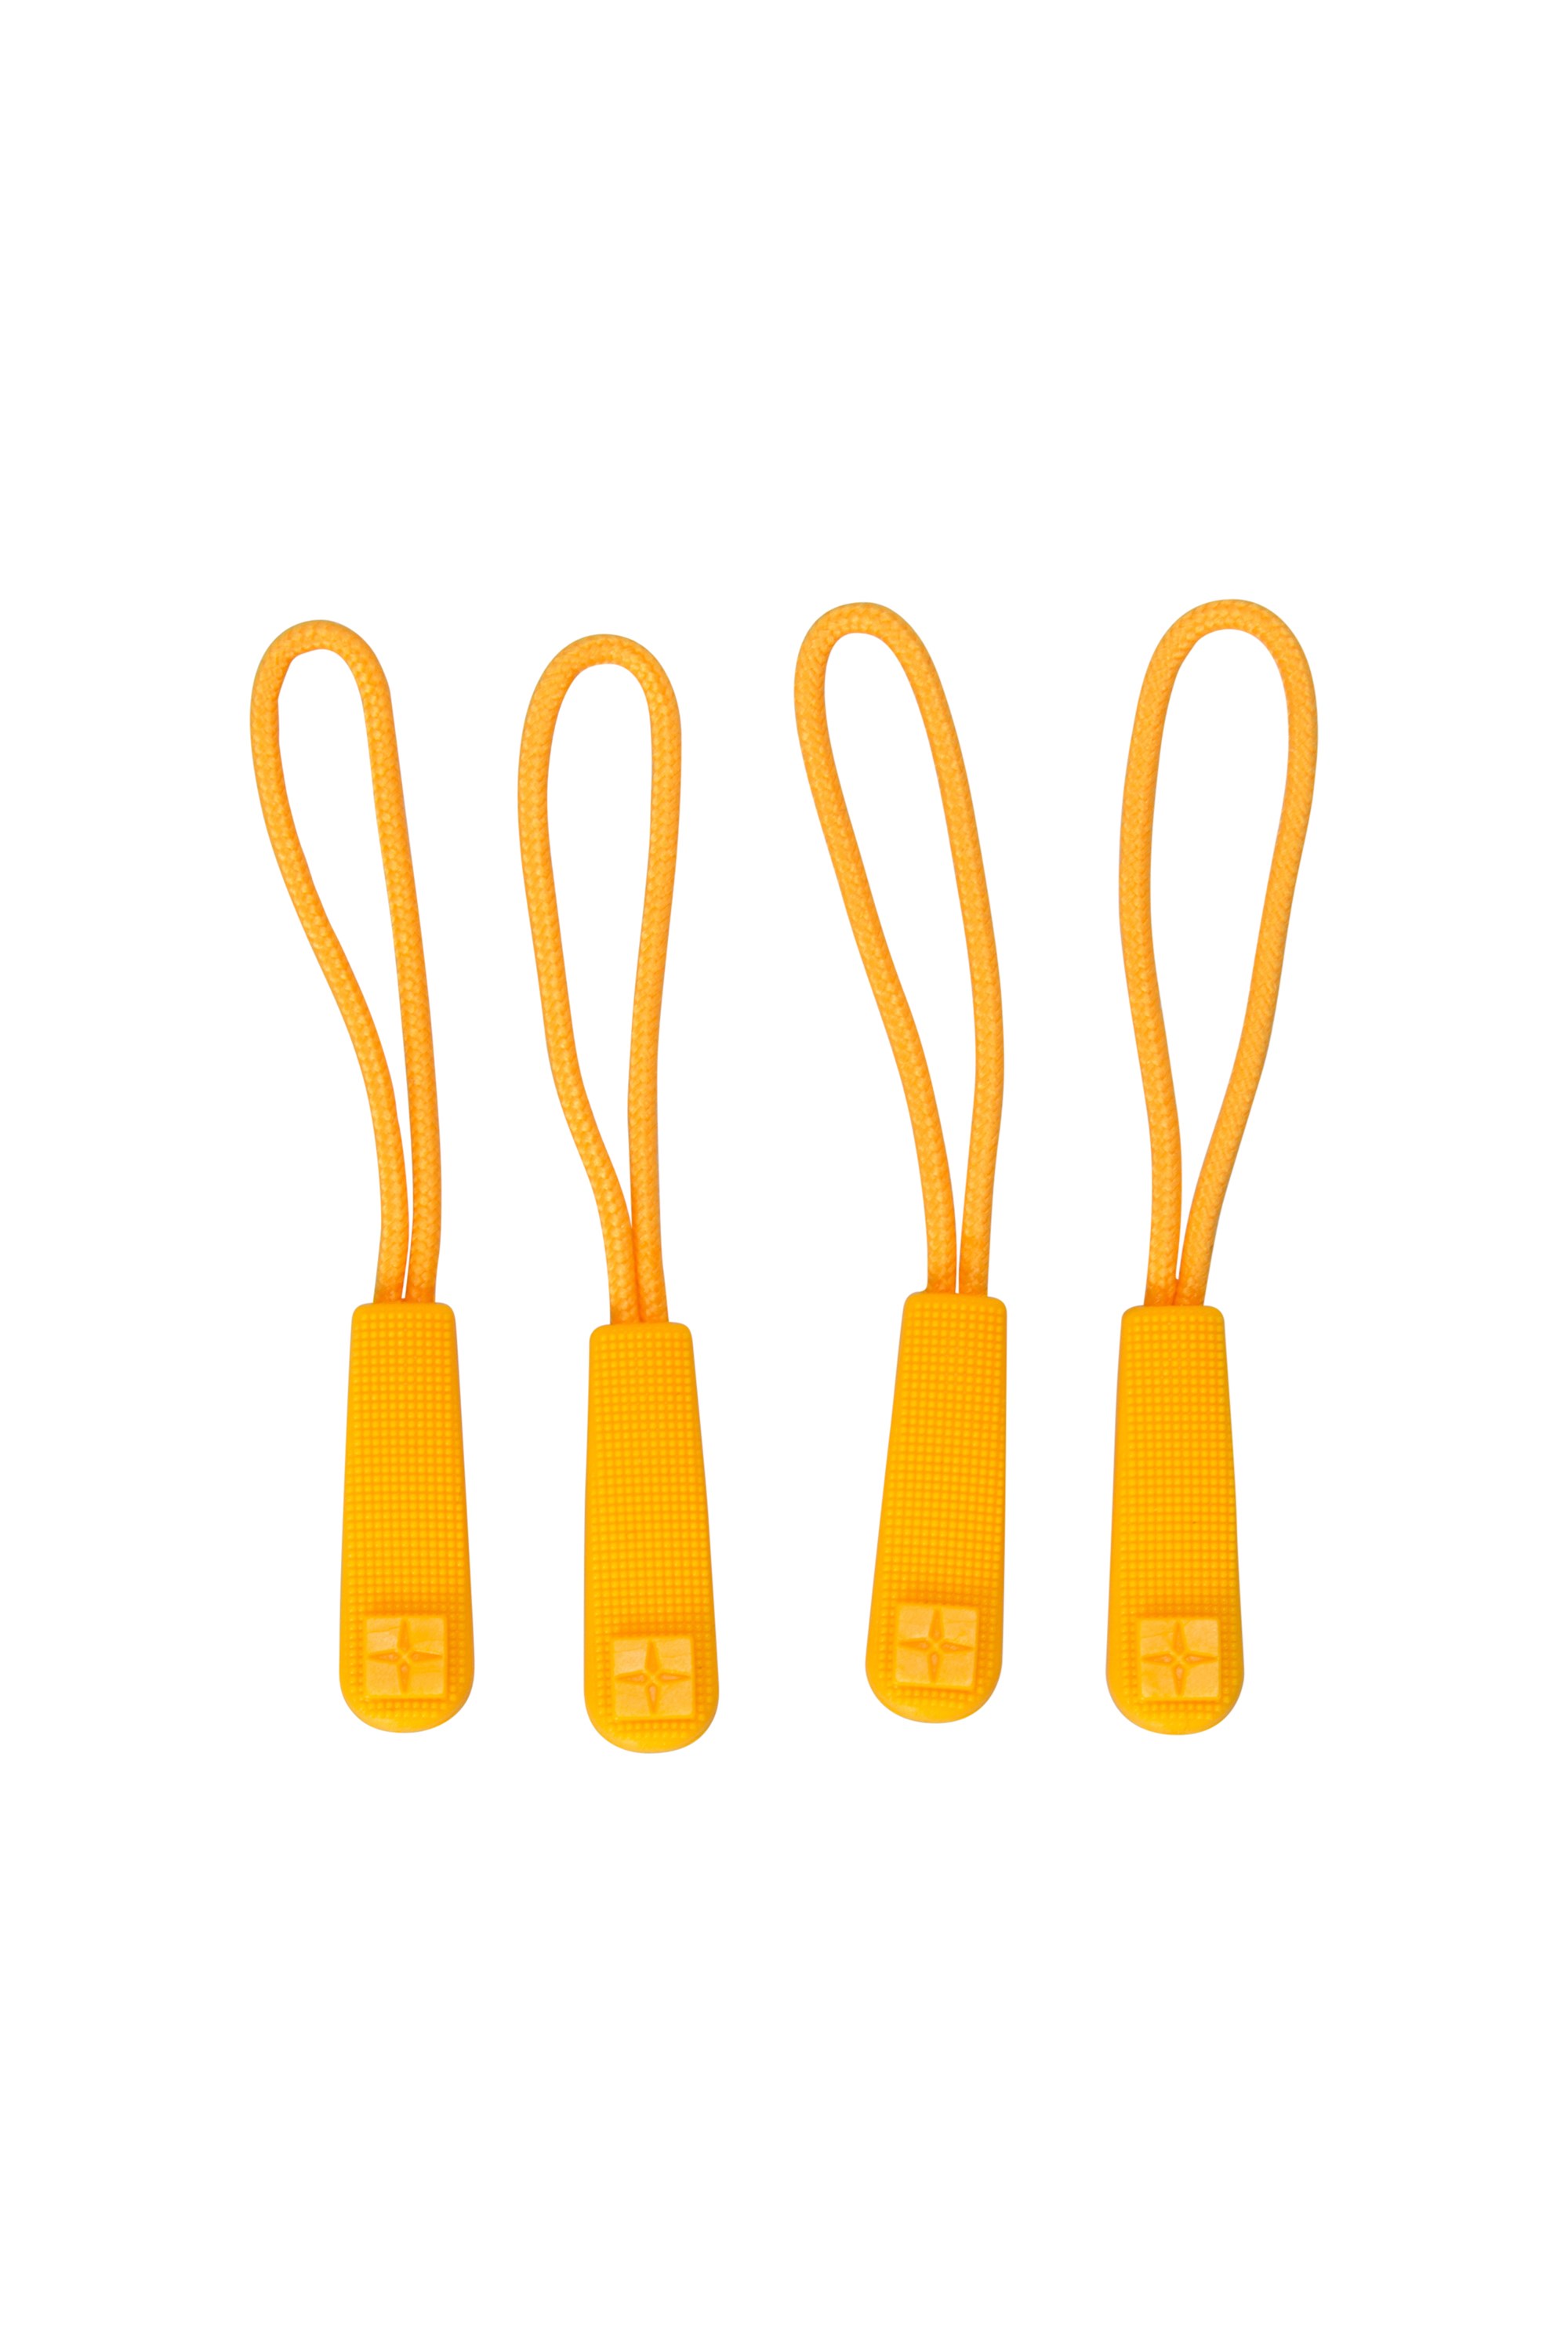 Mountain Warehouse Spare Zip Pullers 4 Pack Yellow